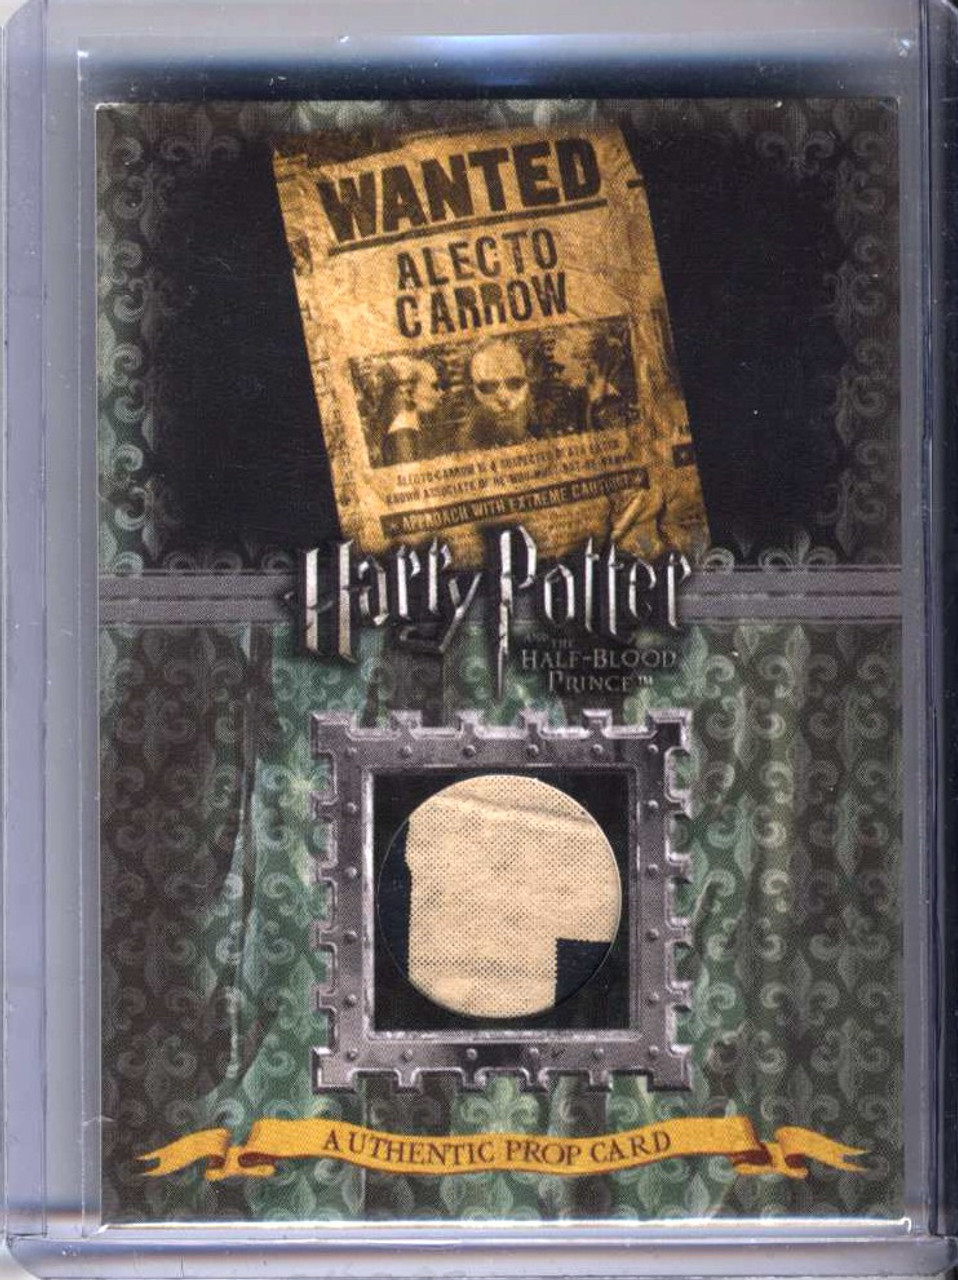 Harry Potter And The Half Blood Prince Alecto Carrow Wanted Poster Authentic Prop Card P12 088240 Artbox Toywiz - shadow mario wanted poster roblox